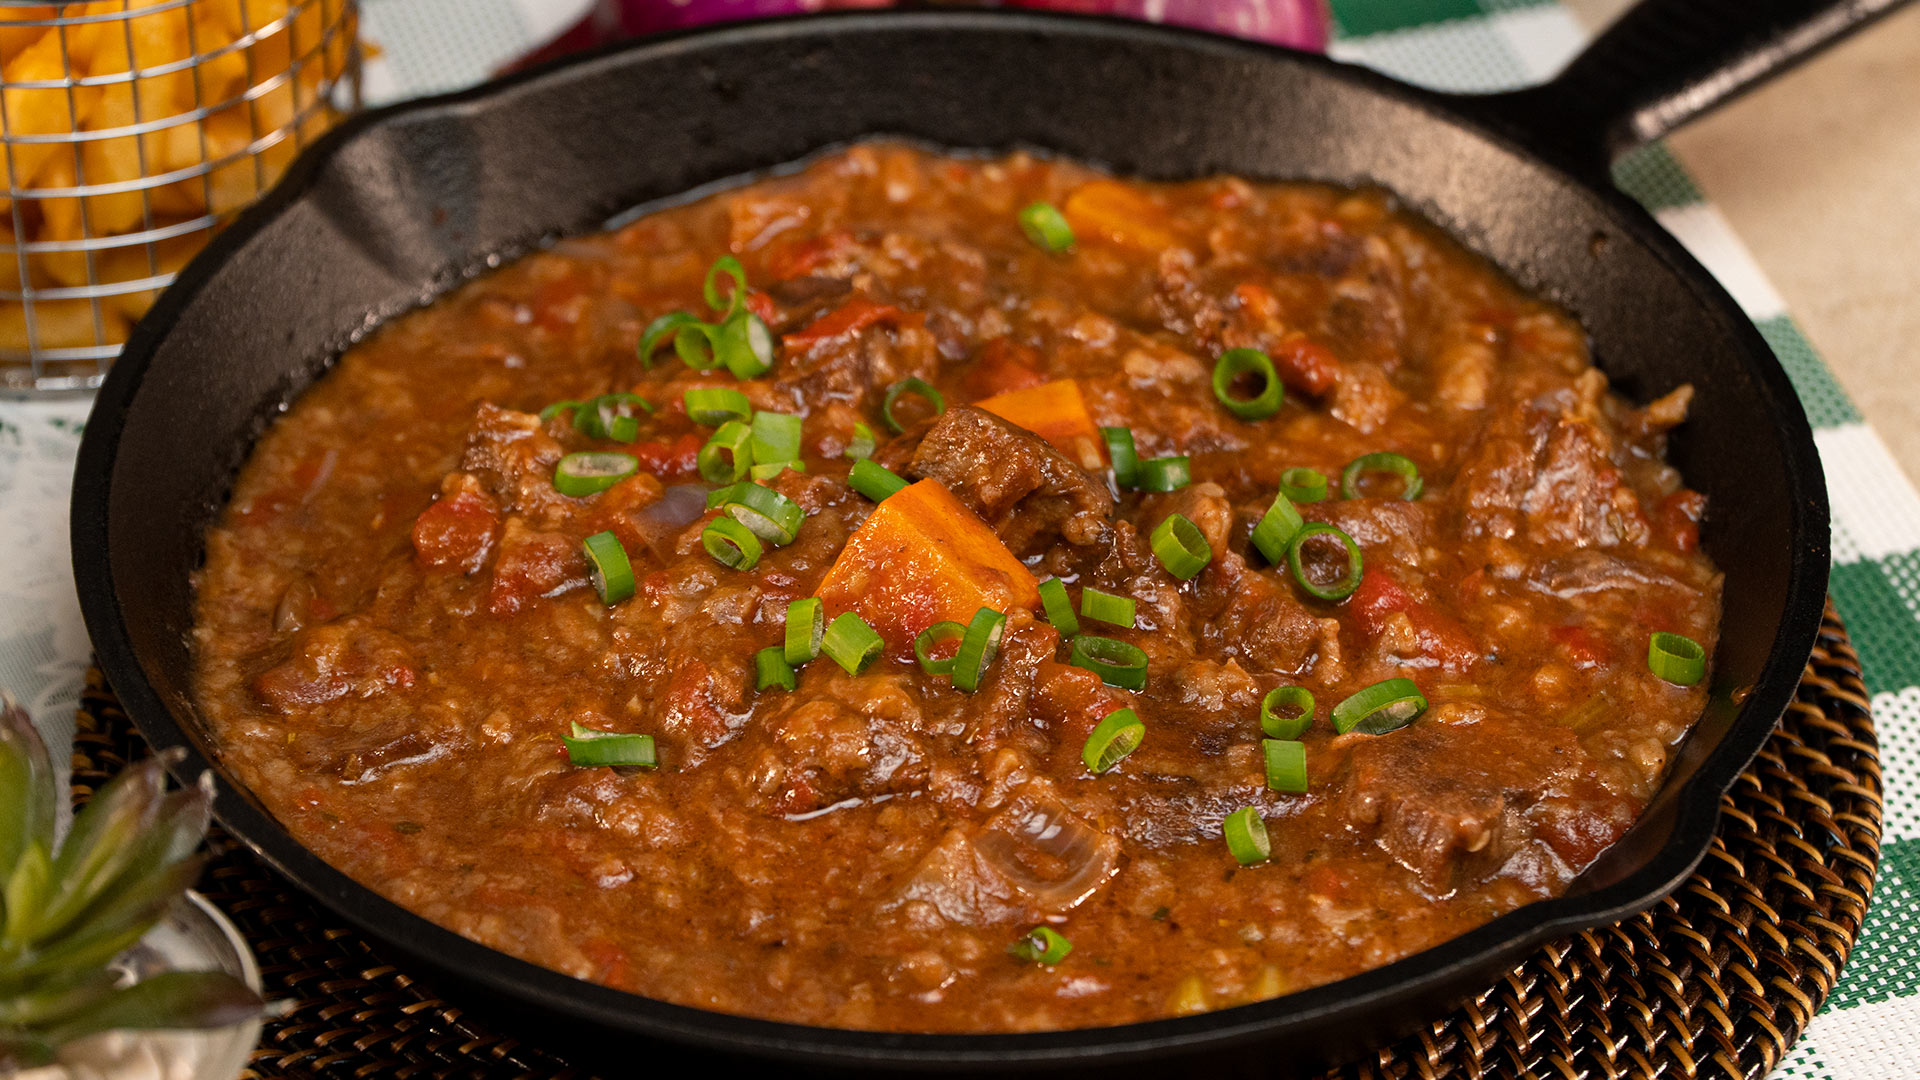 Easy Overnight Slow Cooker Beef Stew Recipe - Recipes.net